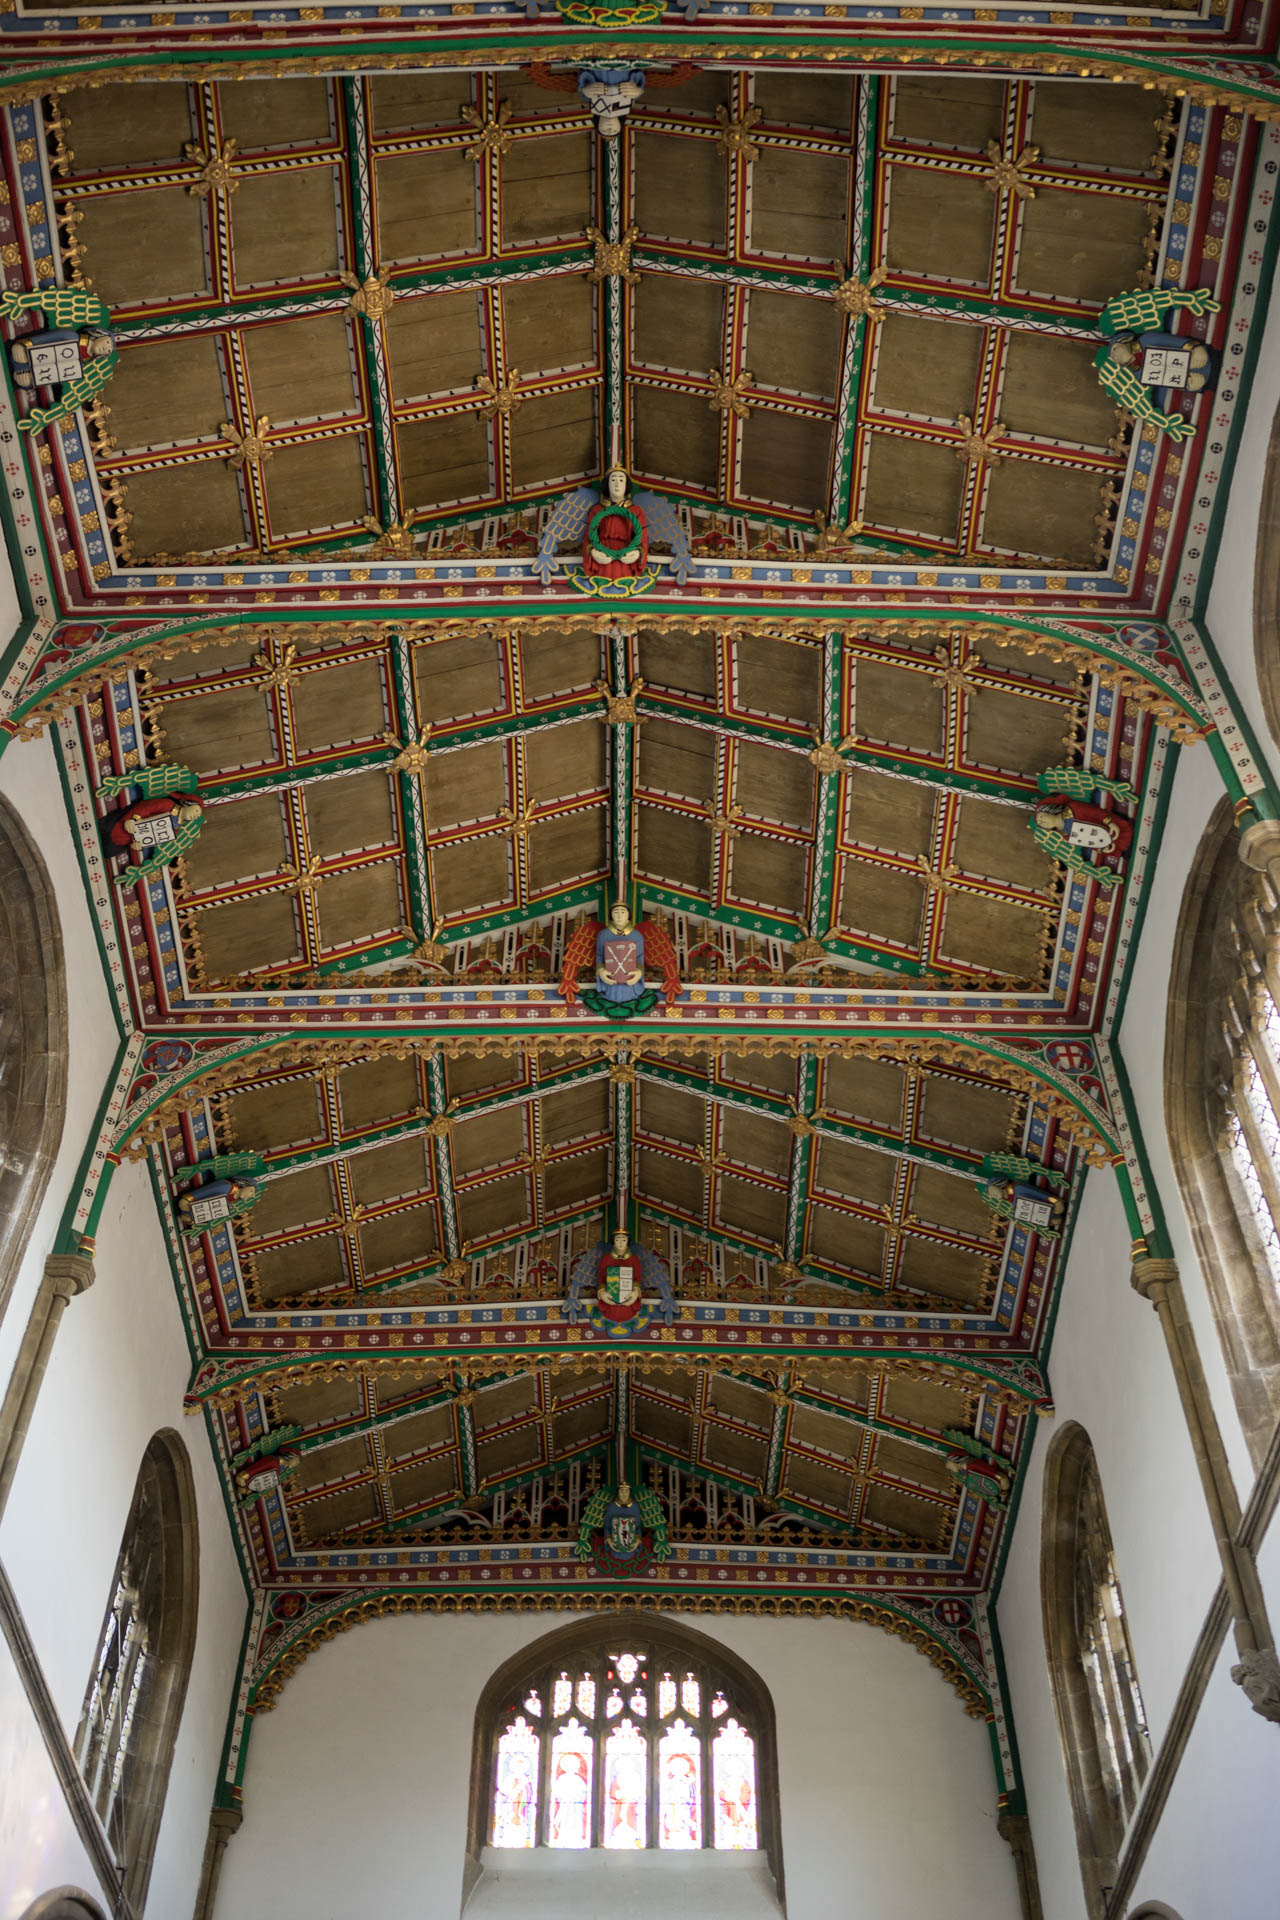 a cathedral with stained glass windows and painted ceilings